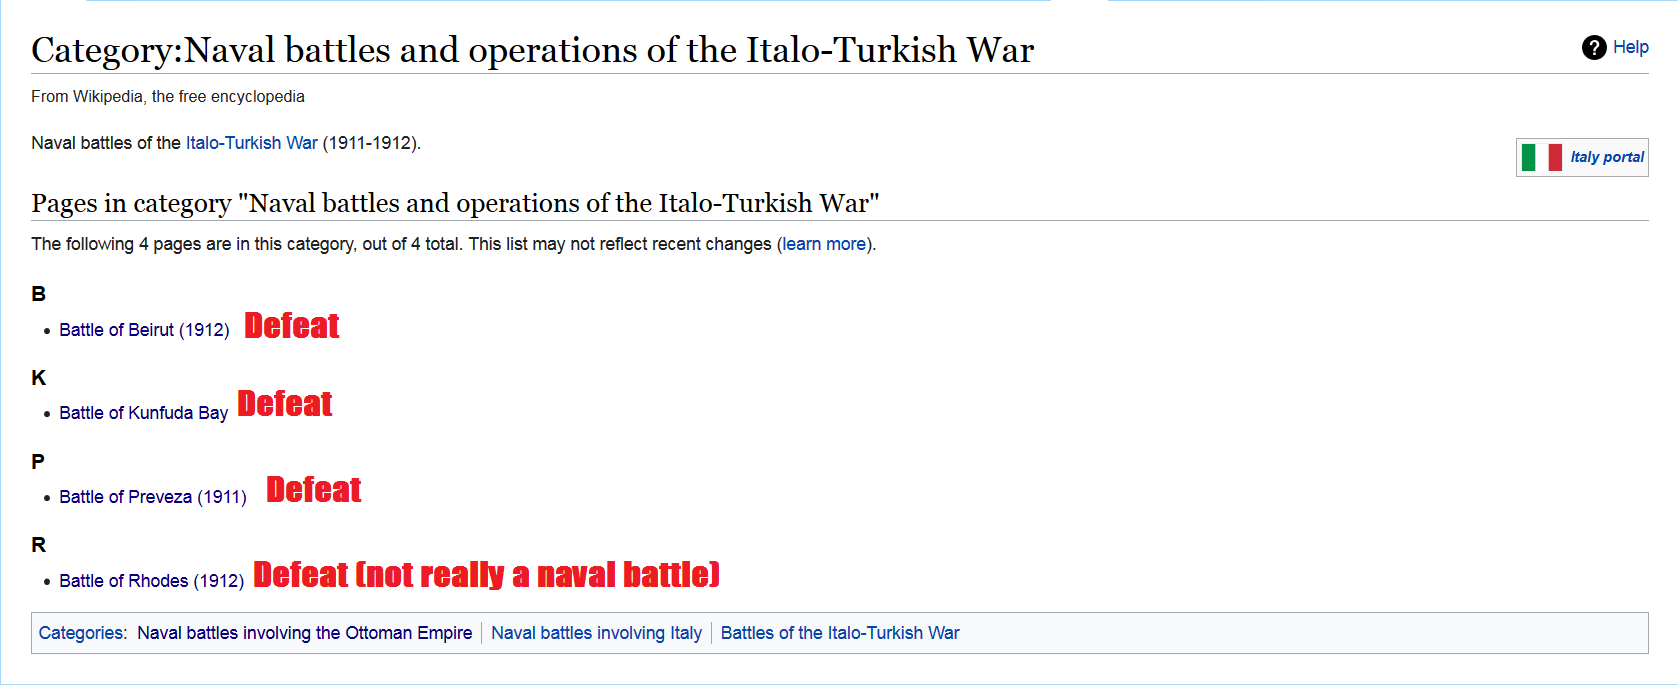 Screenshot_2021-11-12 Category Naval battles and operations of the Italo-Turkish War - Wikipedia.png